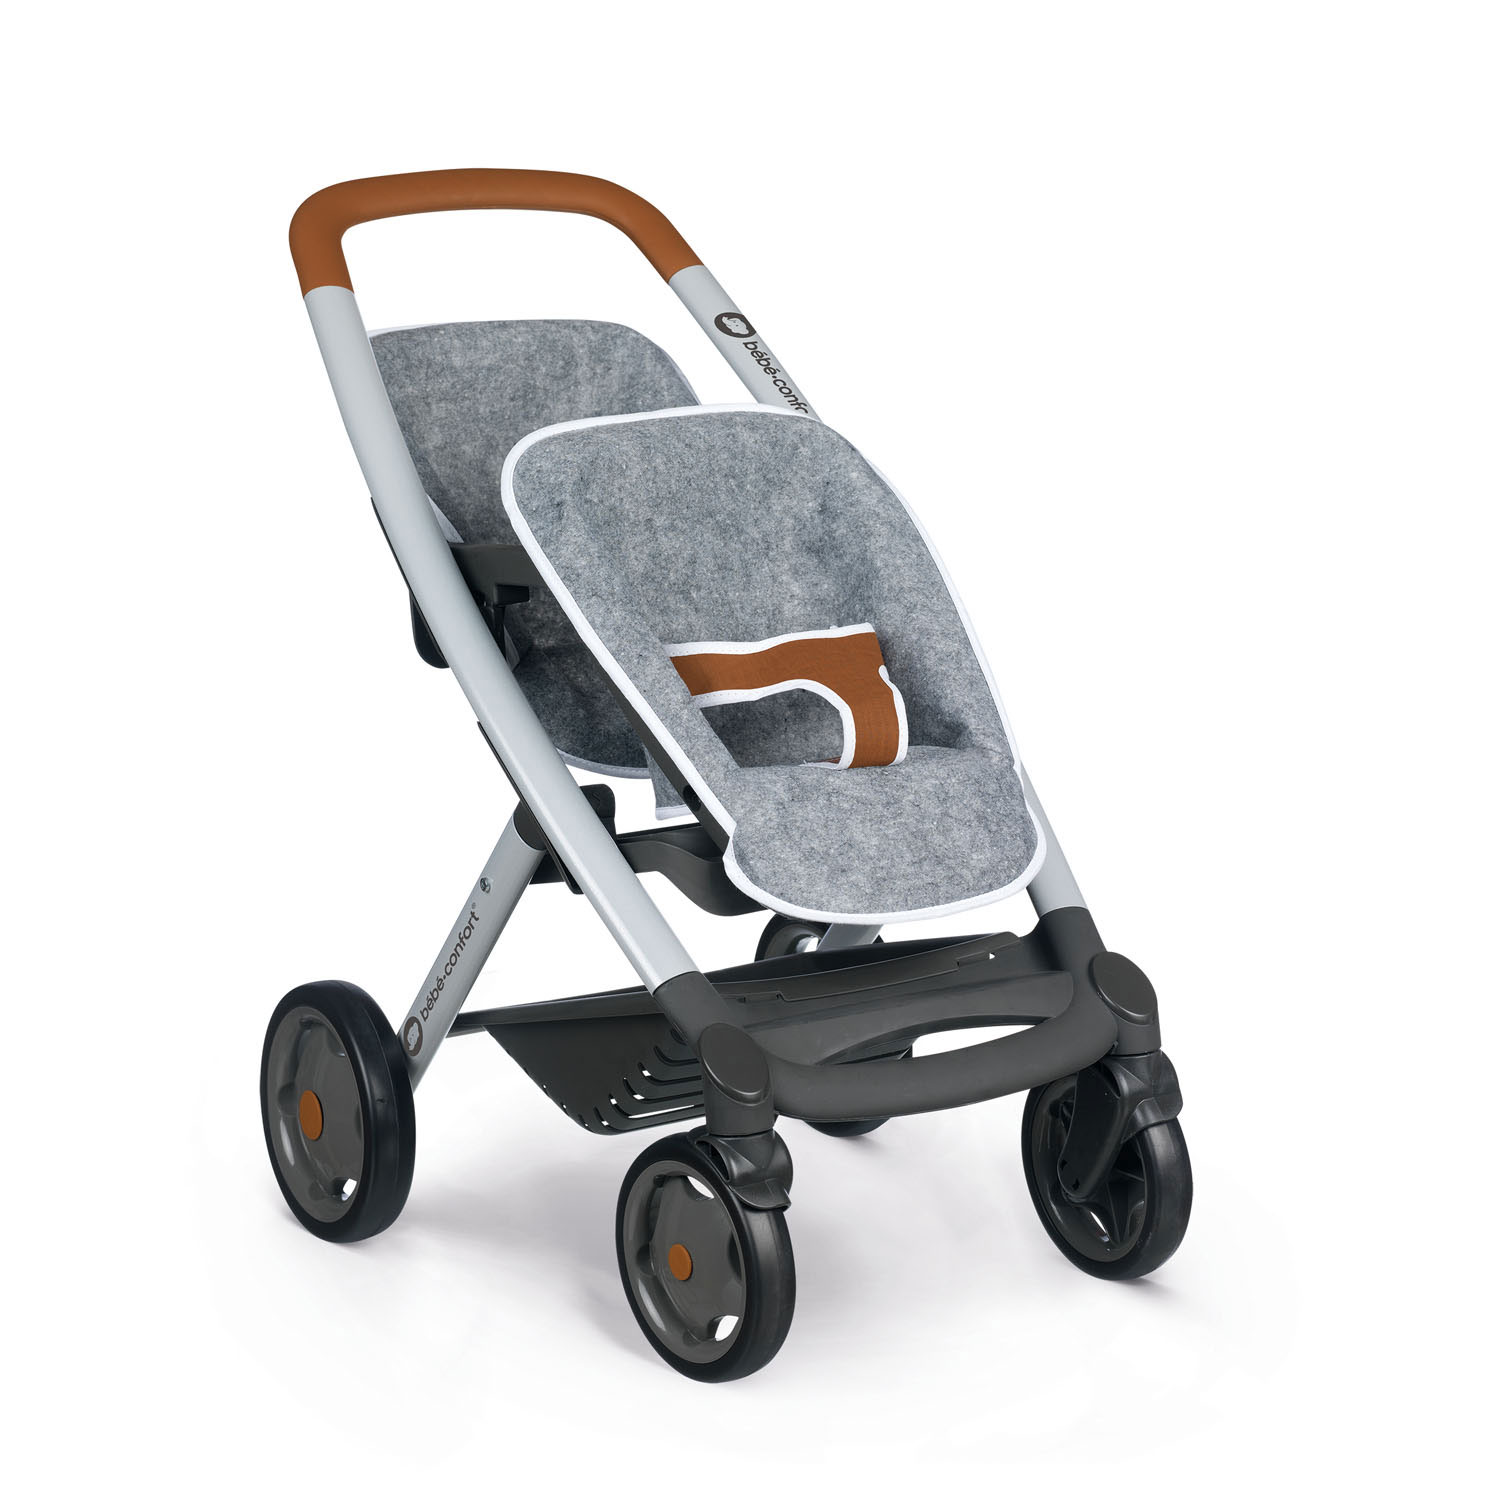 Smoby Baby Confort Buggy | Thimble